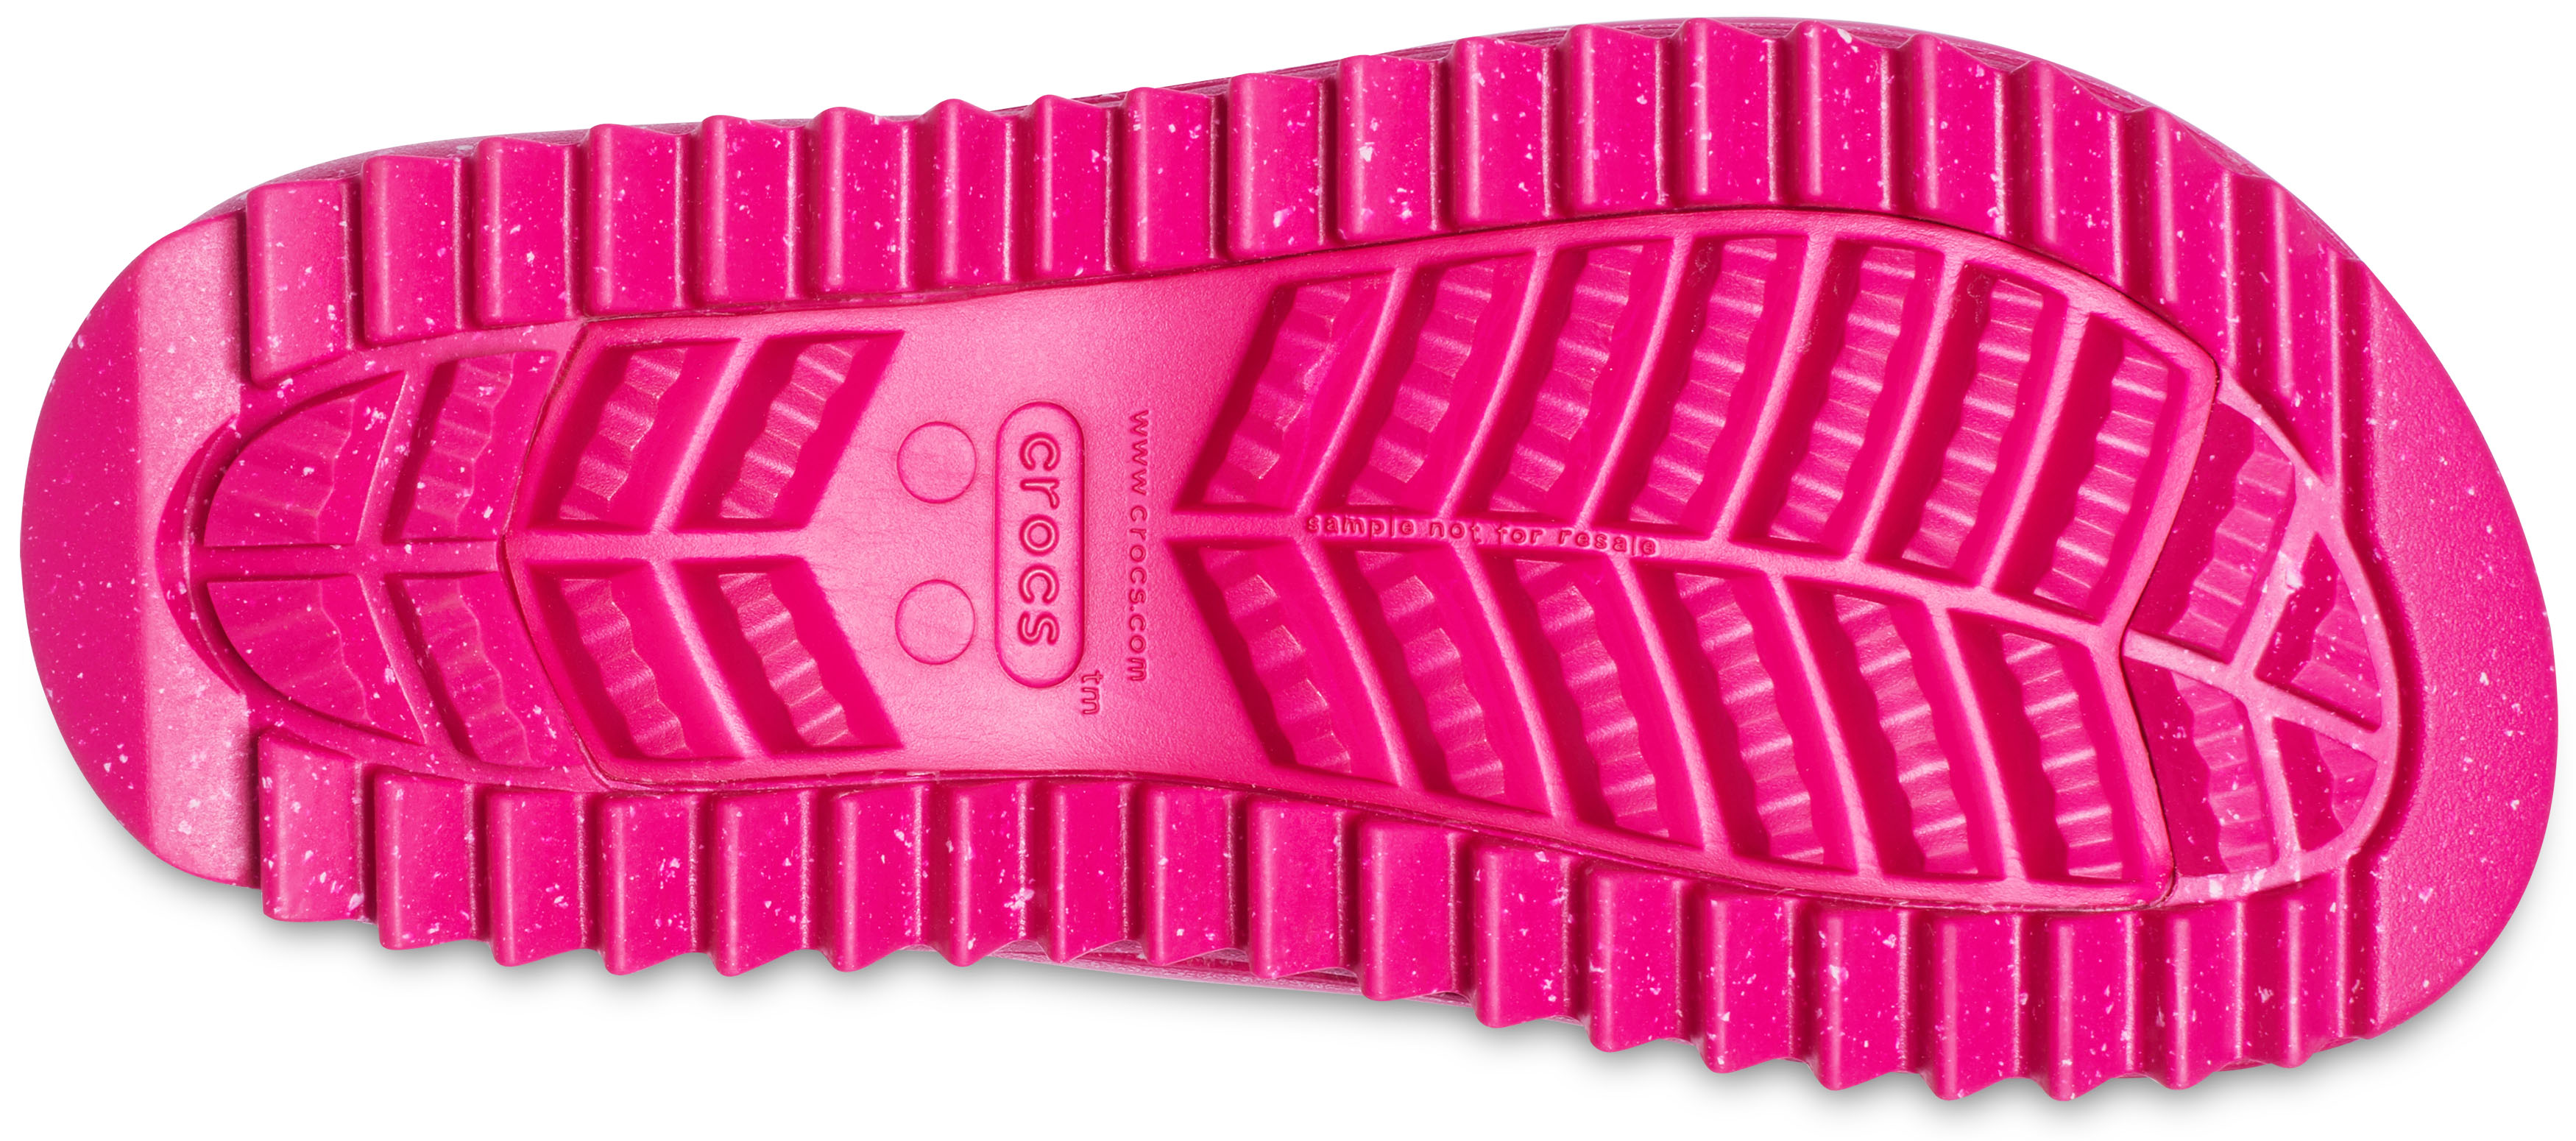 crocs Classic Neo Puff Shorty Boot - Candy Pink Croslite